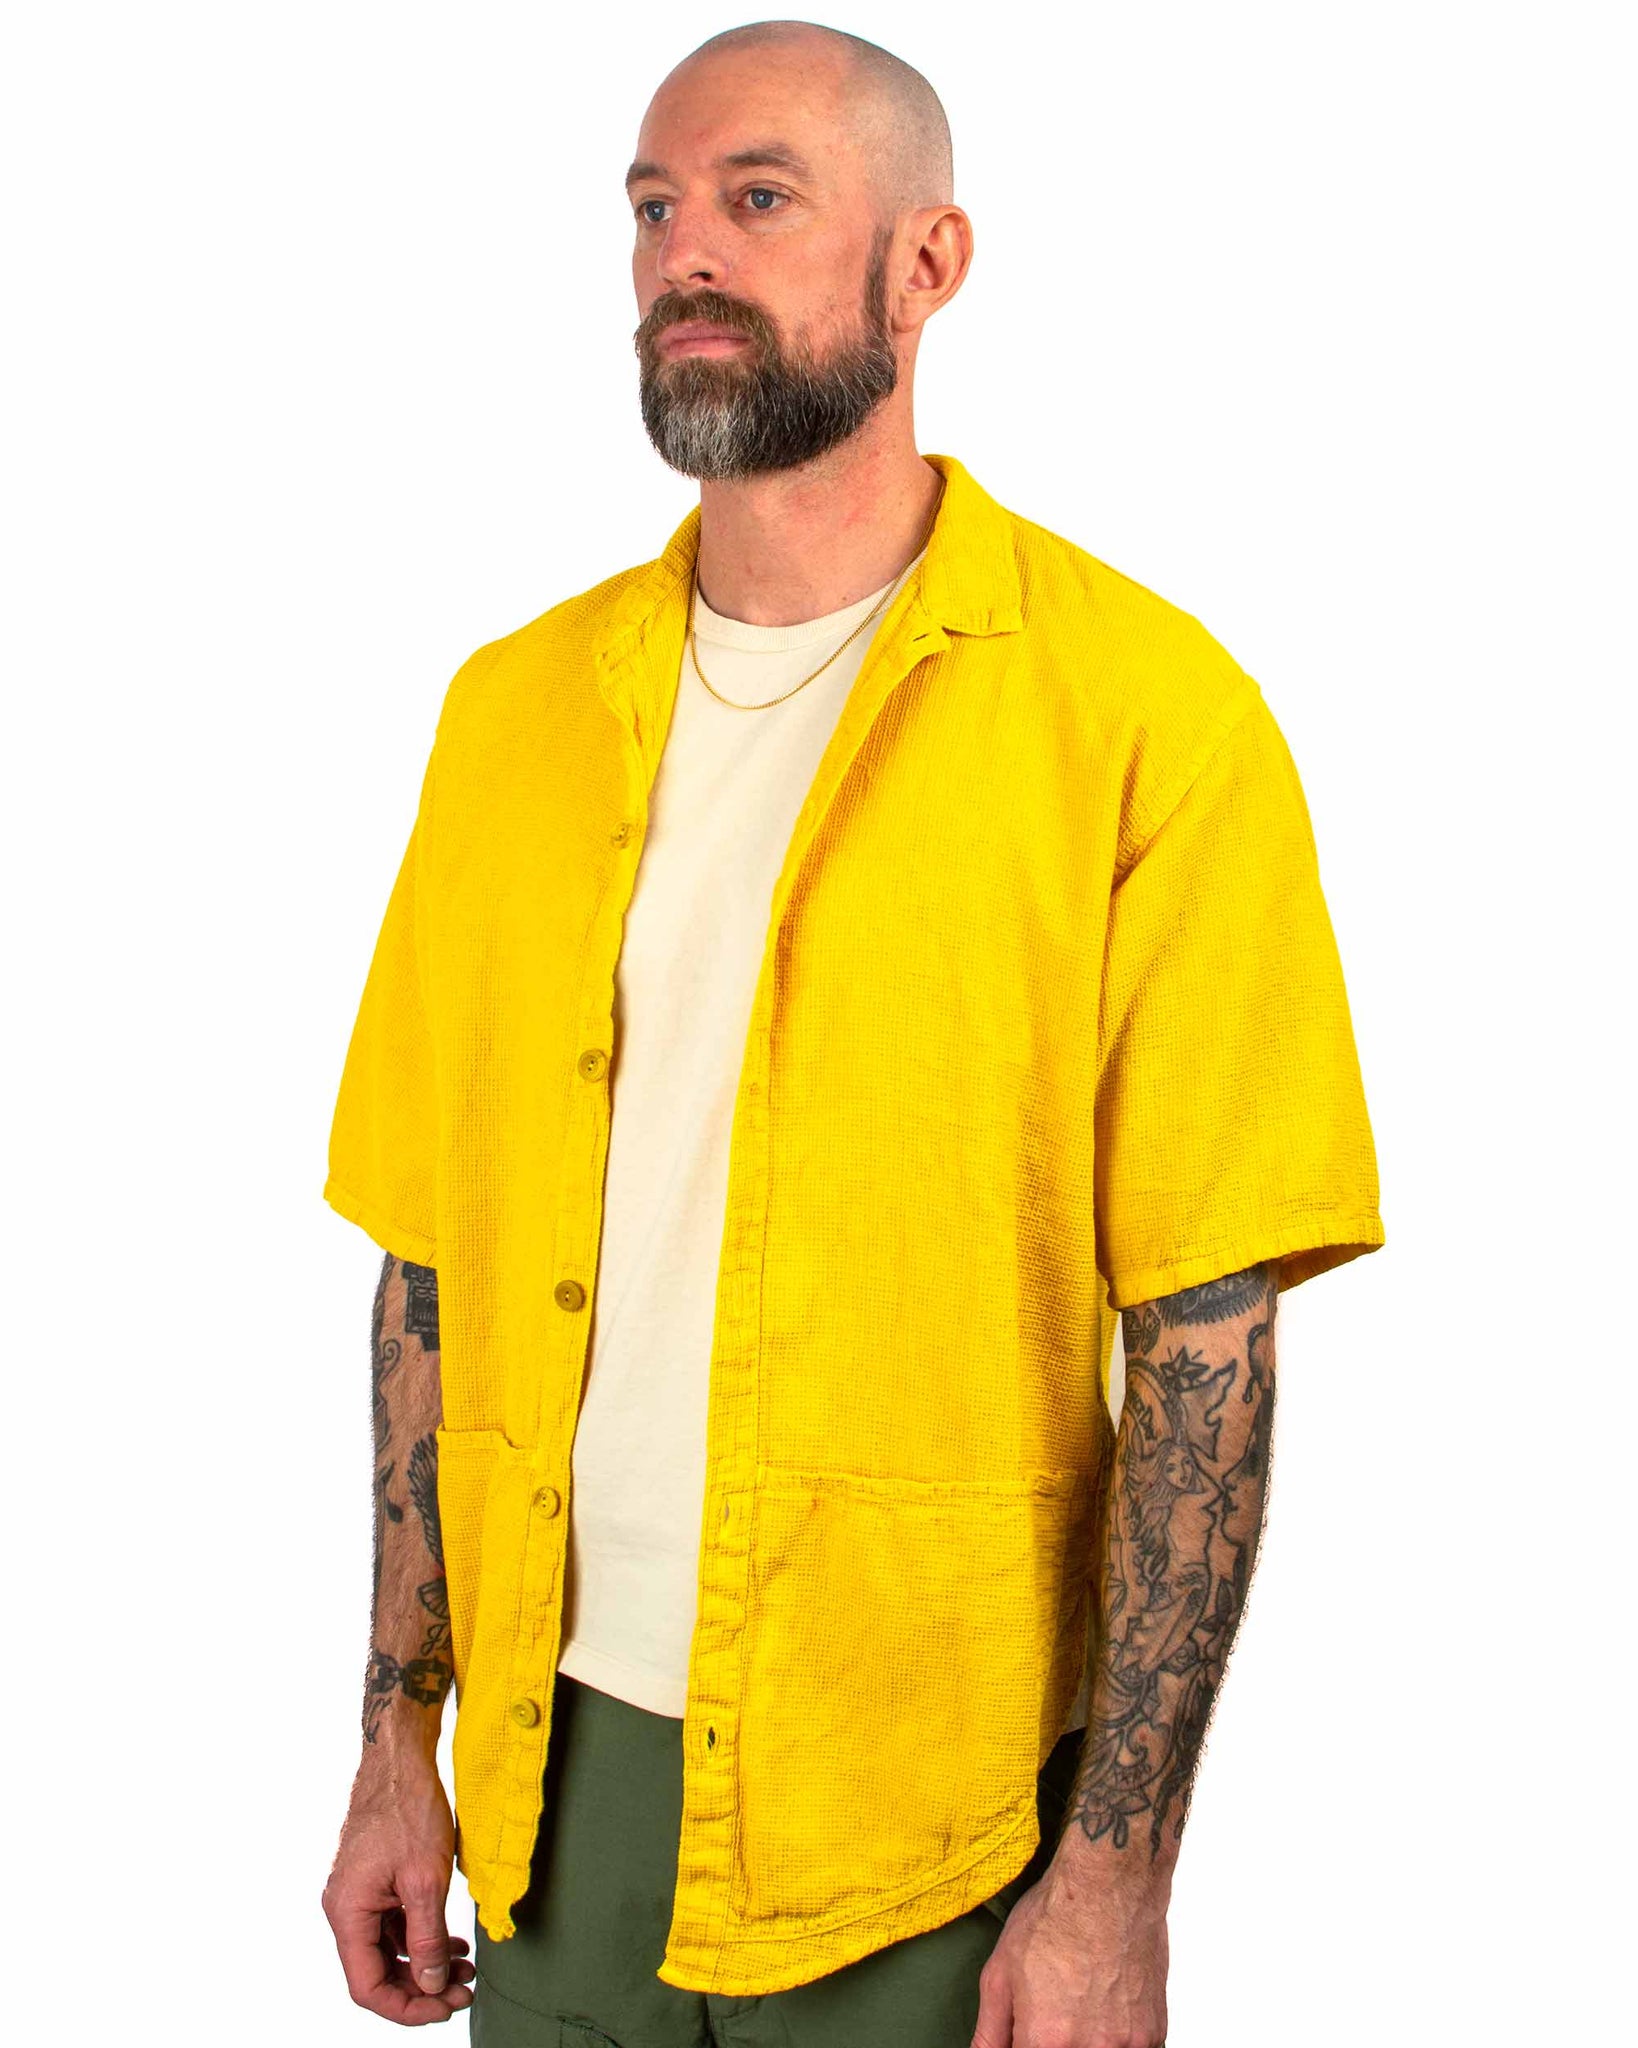 Tender Type 443 Short Sleeve Compass Pocket Shirt Fine Cotton Beekeeper's Cloth Tumeric Dyed Close